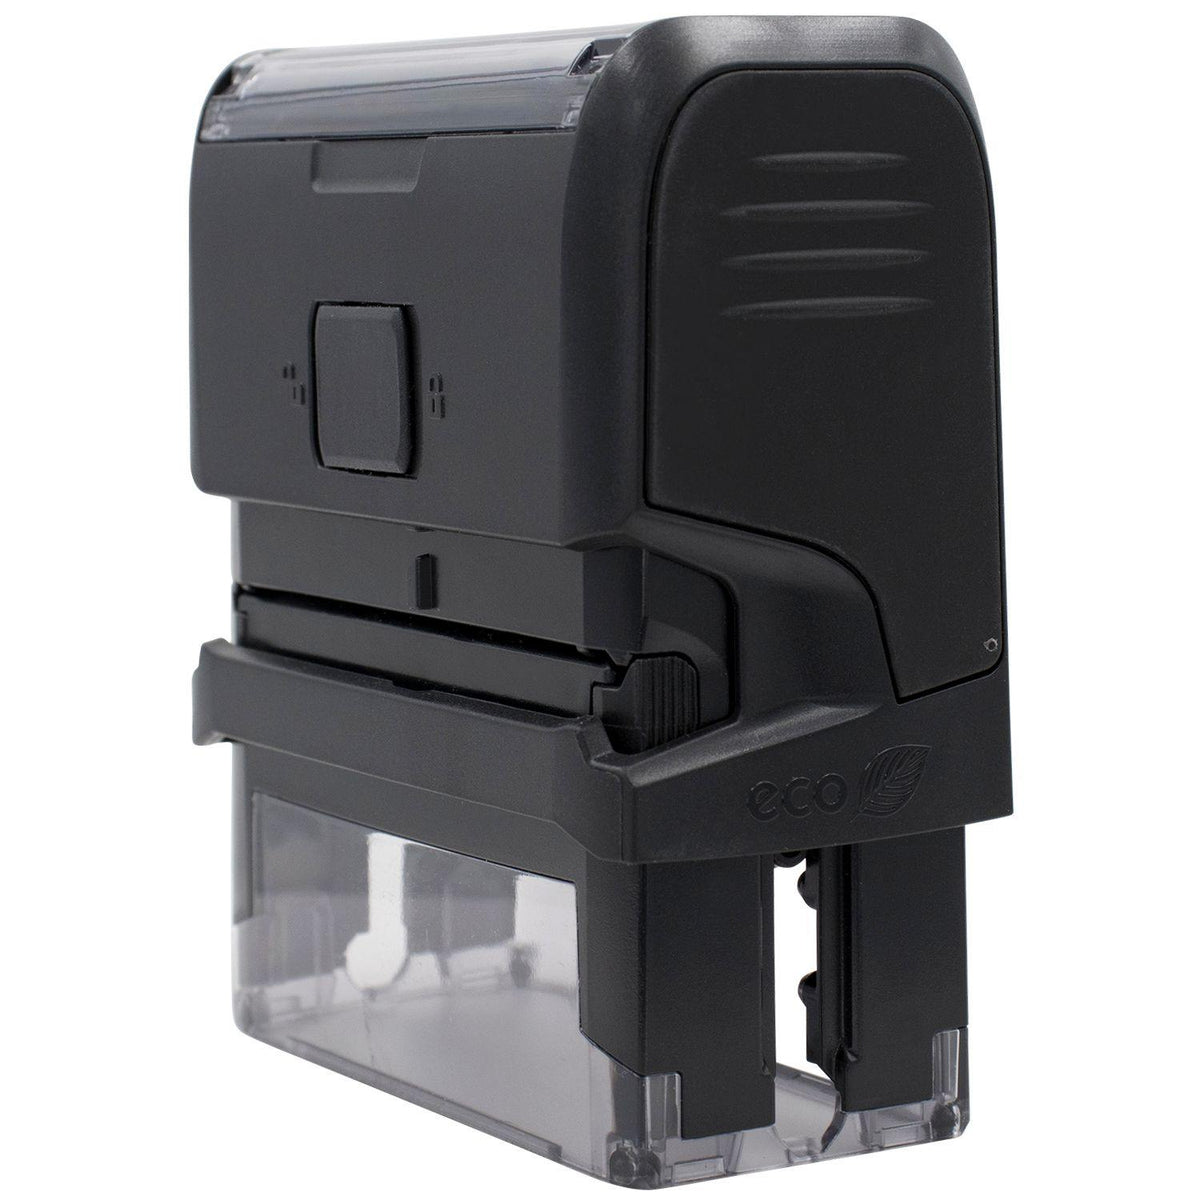 Self Inking Dnr Stamp - Engineer Seal Stamps - Brand_Trodat, Impression Size_Small, Stamp Type_Self-Inking Stamp, Type of Use_Medical Office